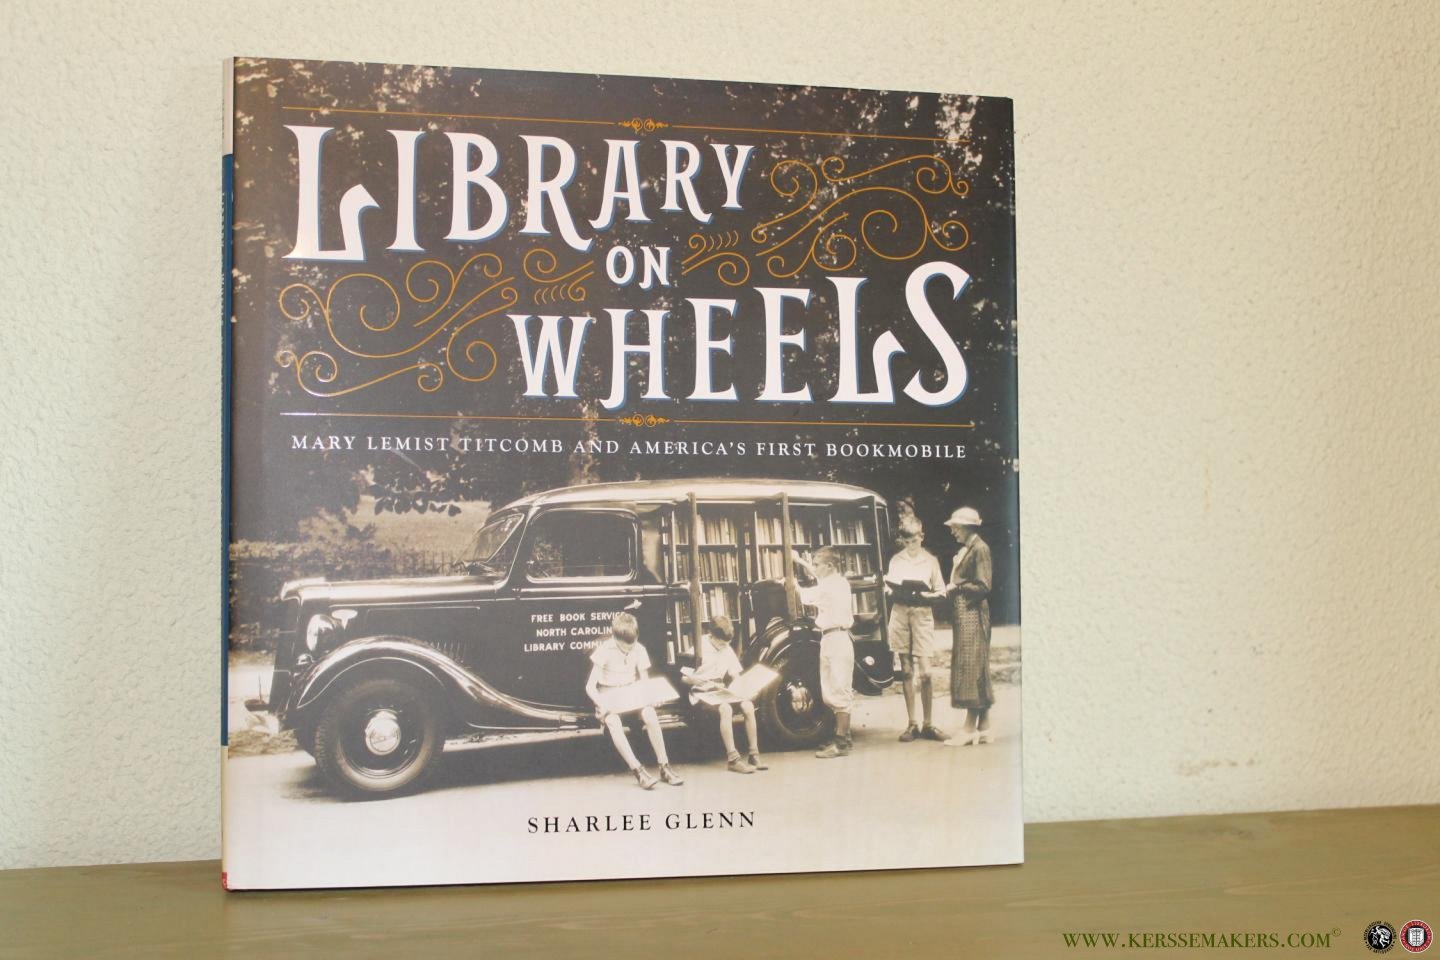 GLENN, Sharlee - Library on Wheels. Mary Lemist Titcomb and America's First Bookmobile